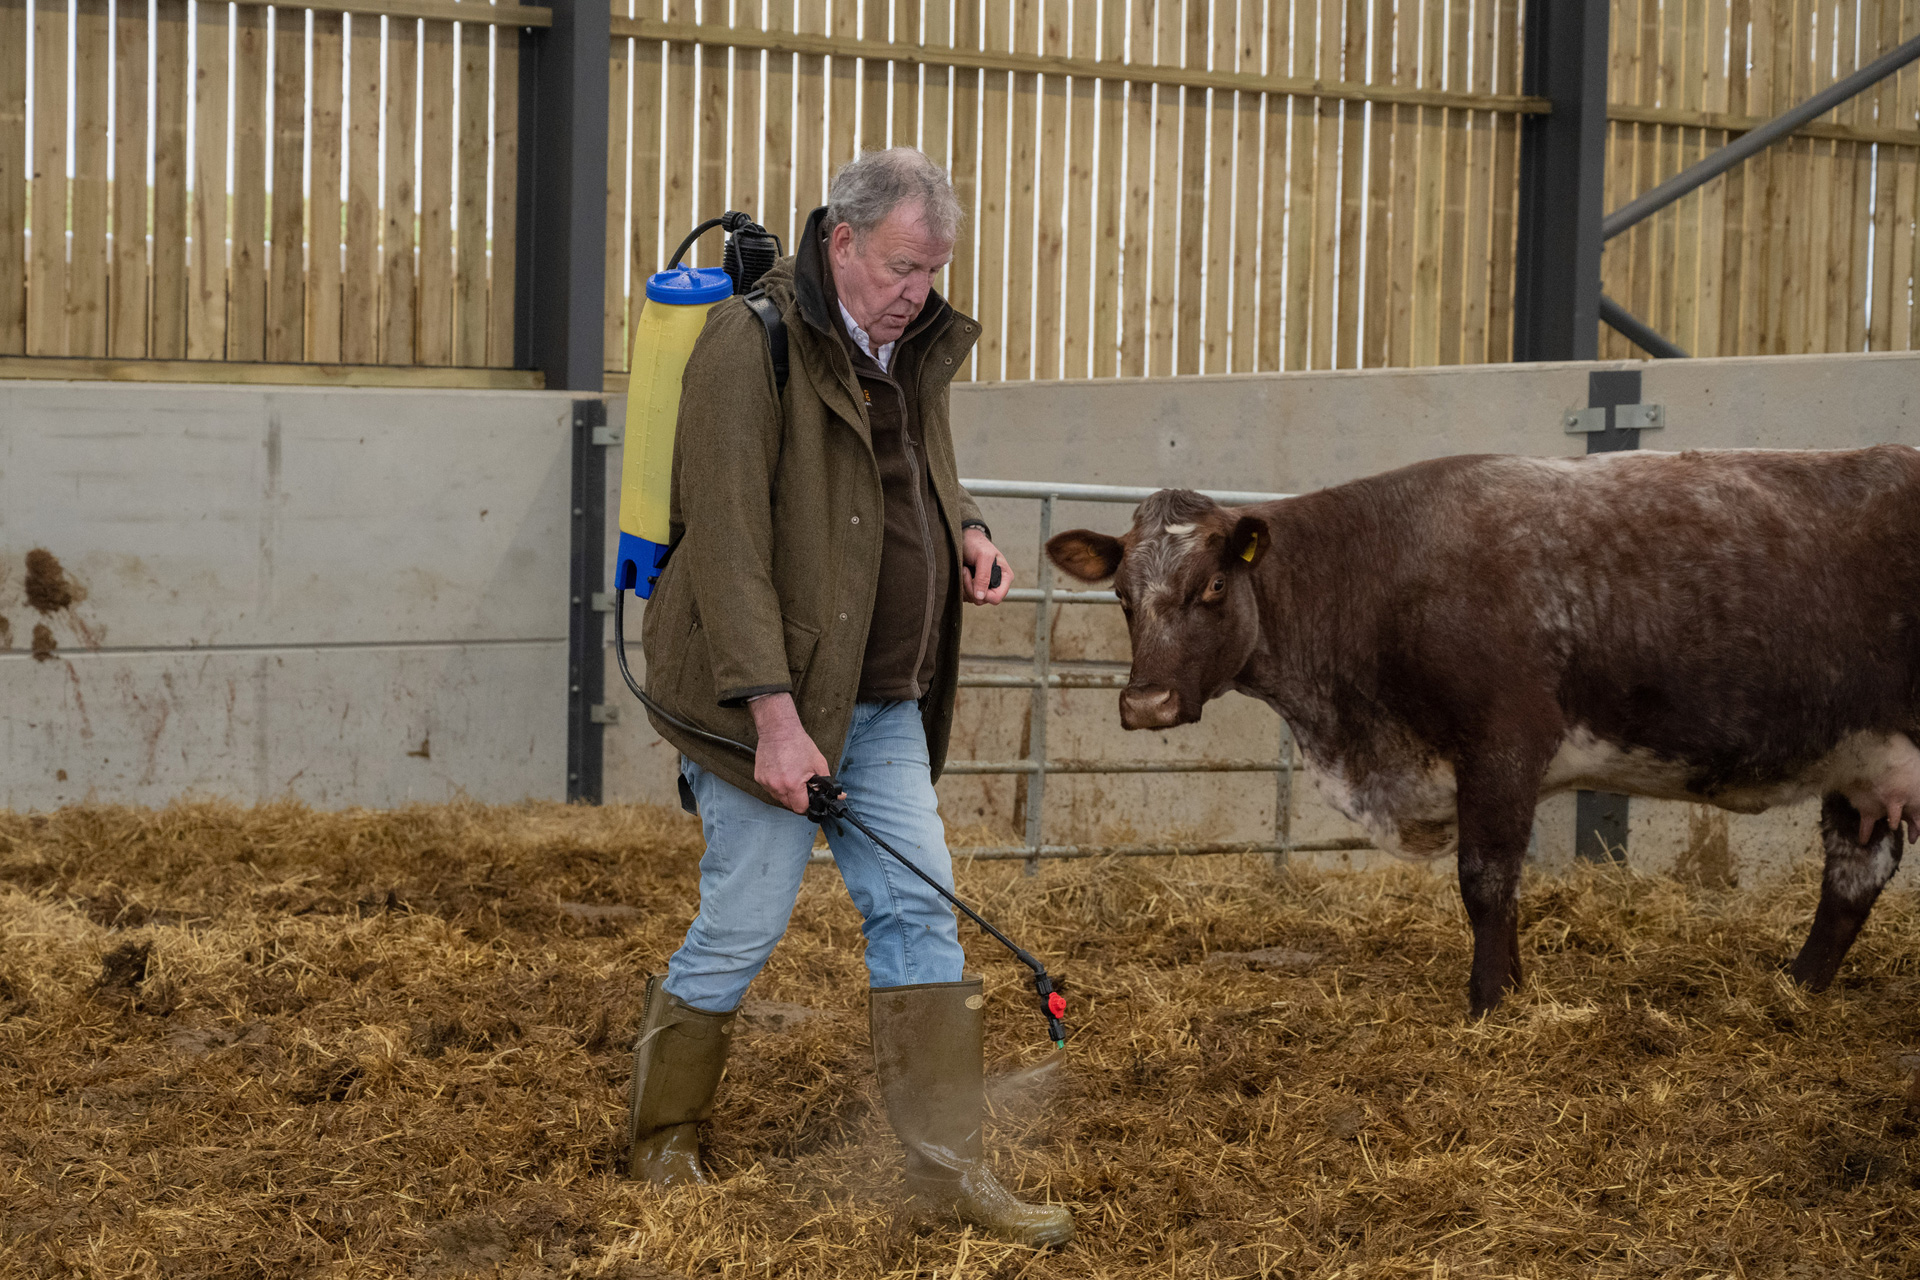 Jeremy Clarkson with a cow